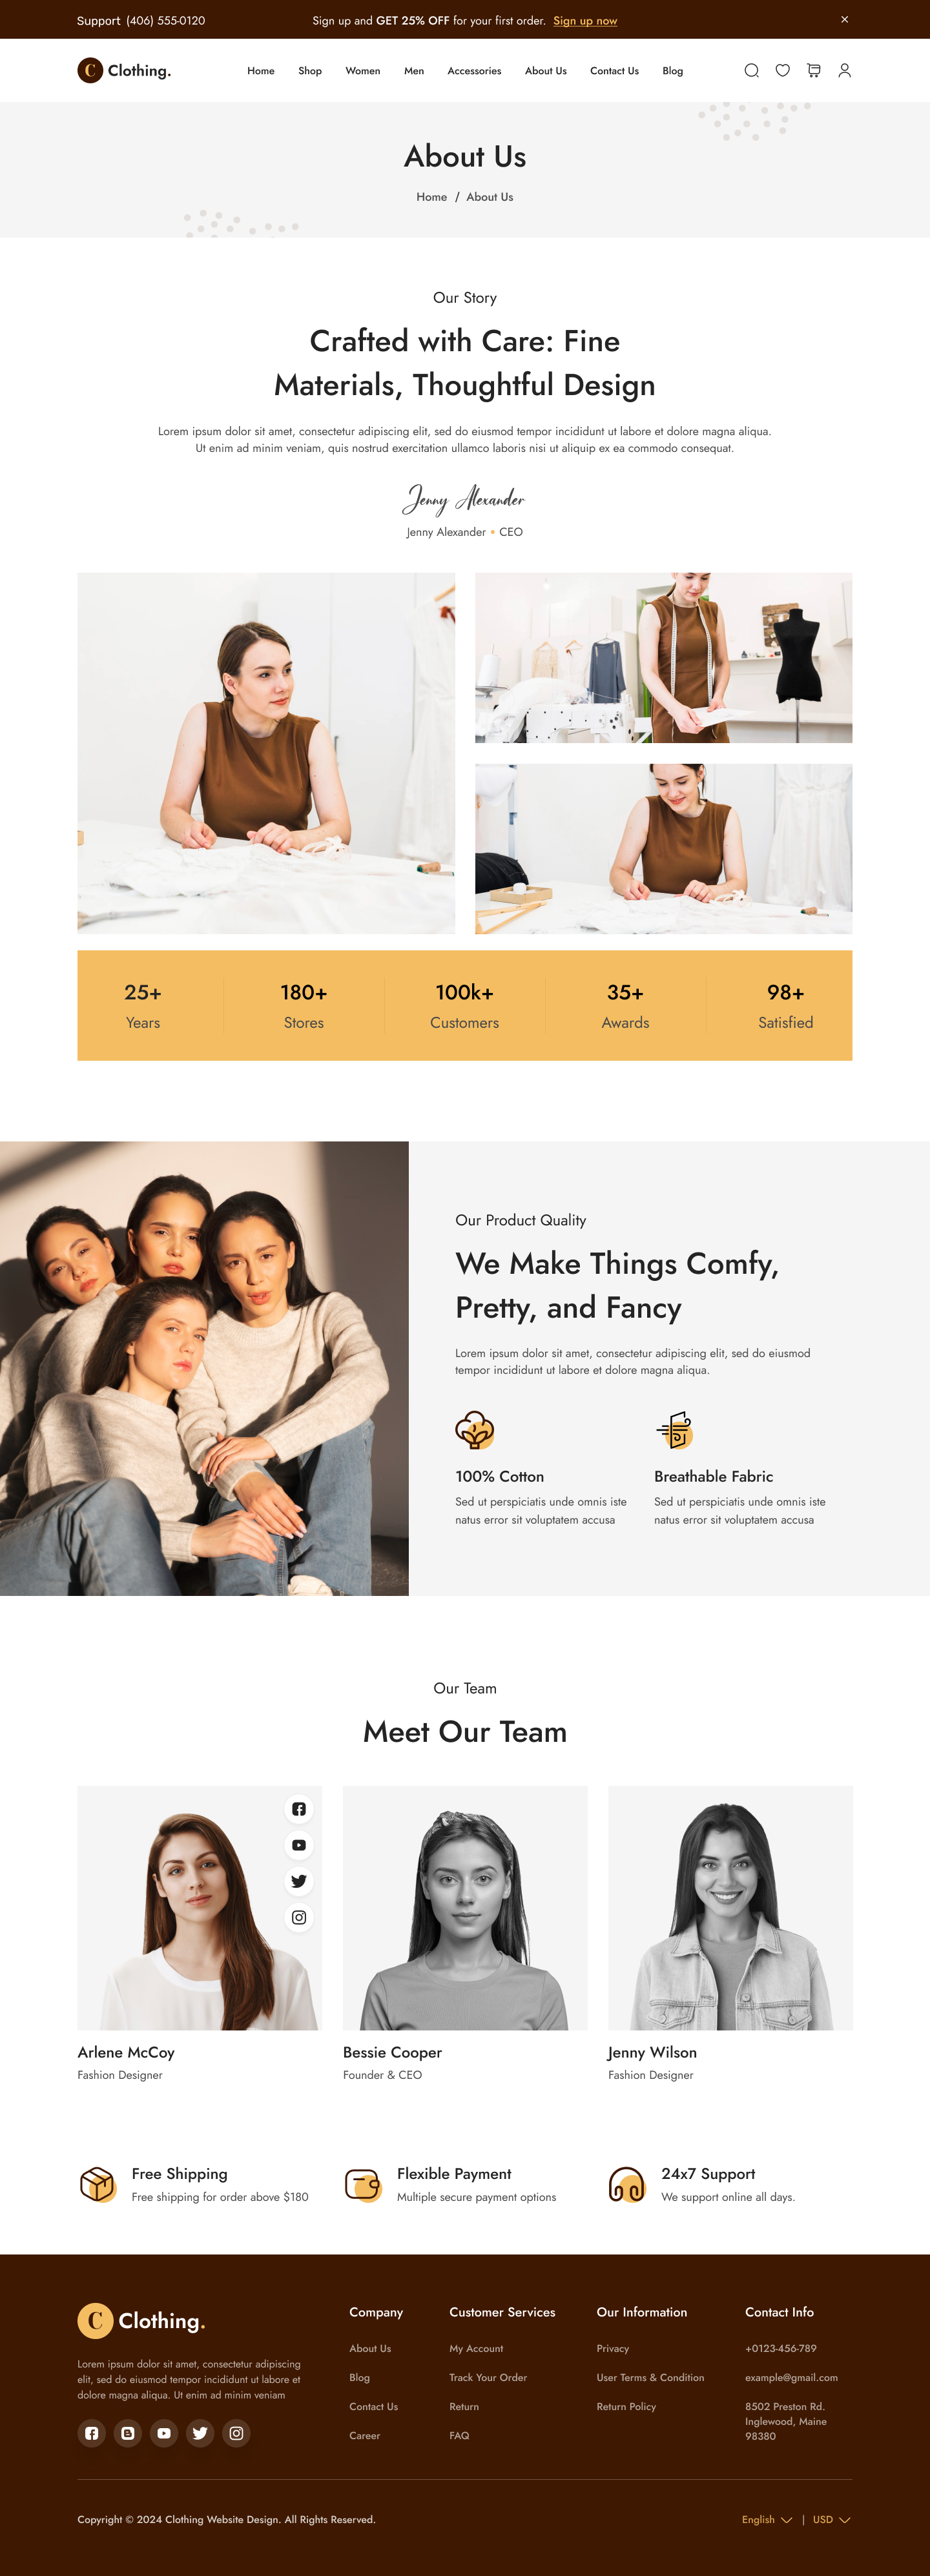 Clothing Store Website UI UX About Us Page Design